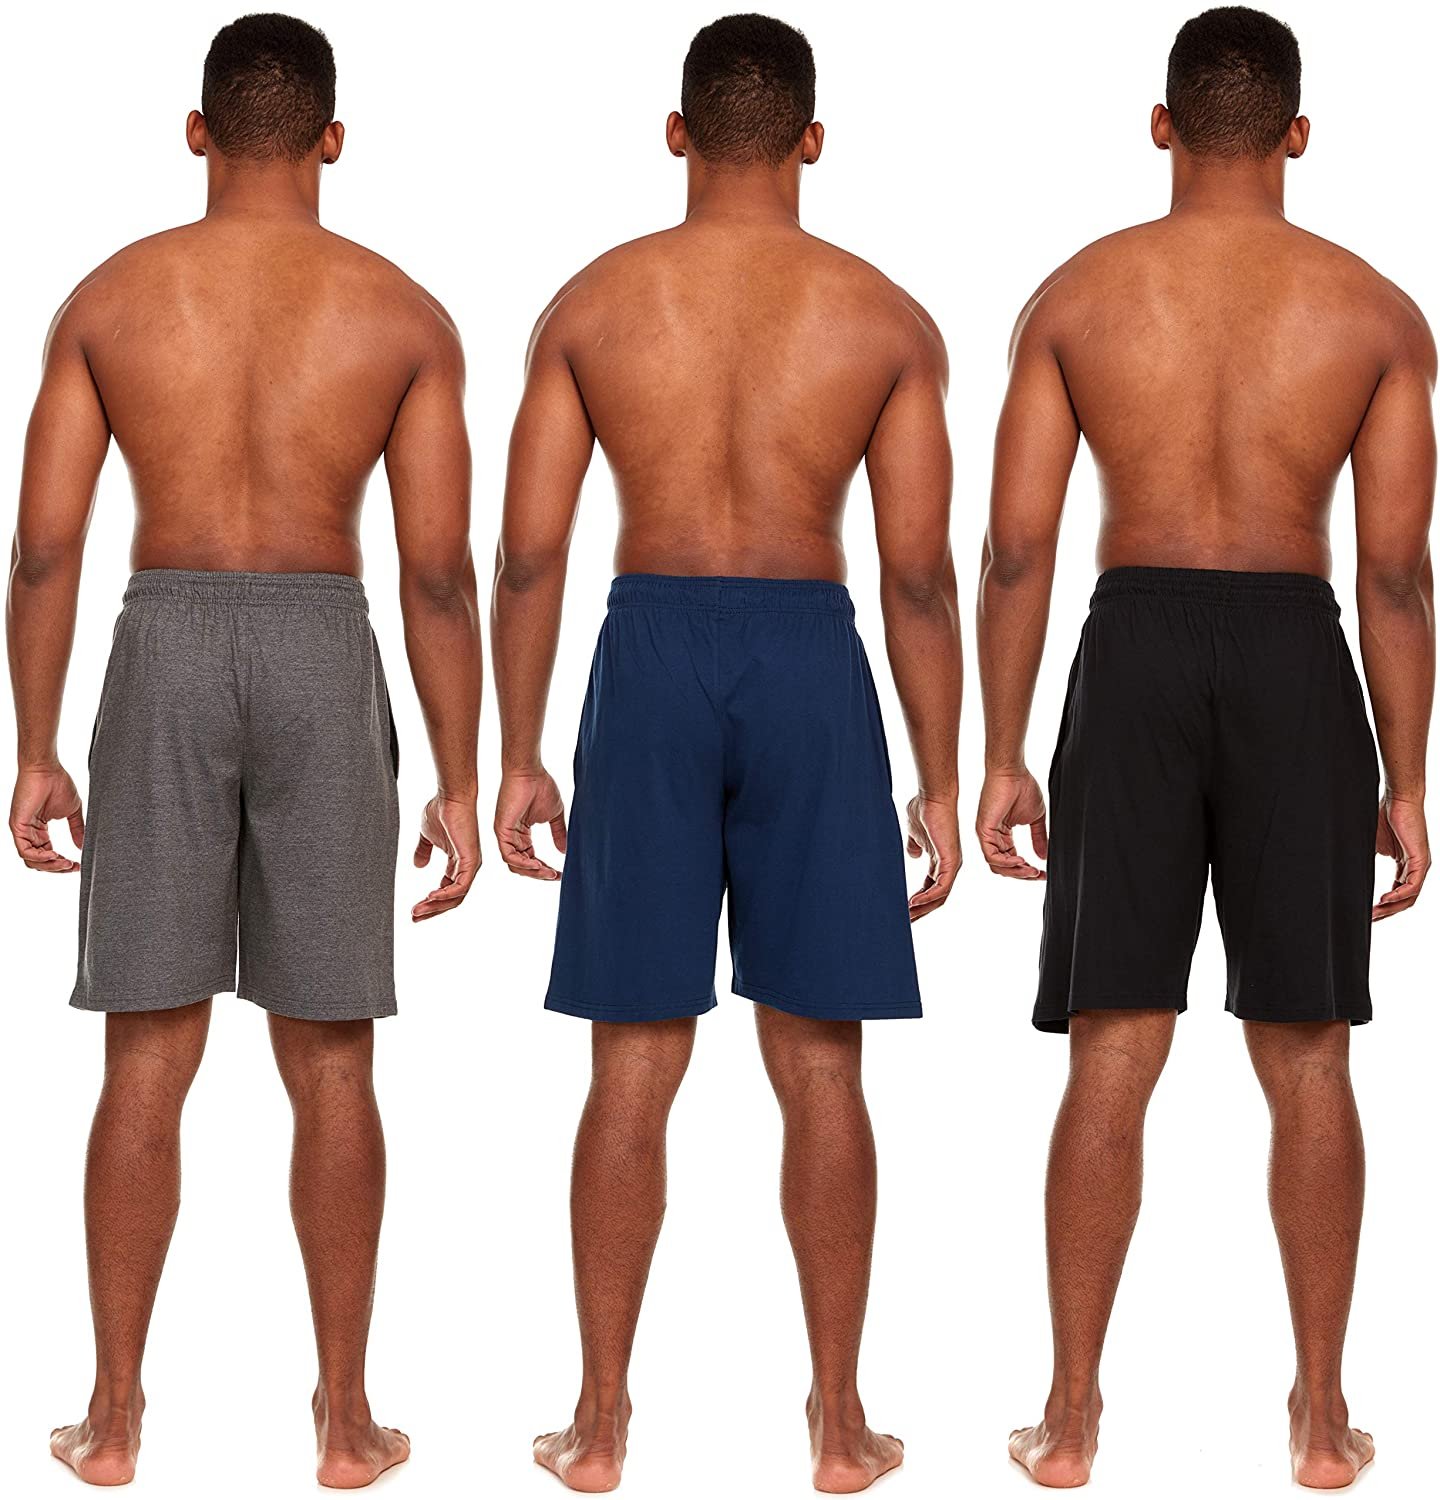 Essential Elements 3 Pack: Men's 100% Cotton Sleep Lounge Casual Shorts ...